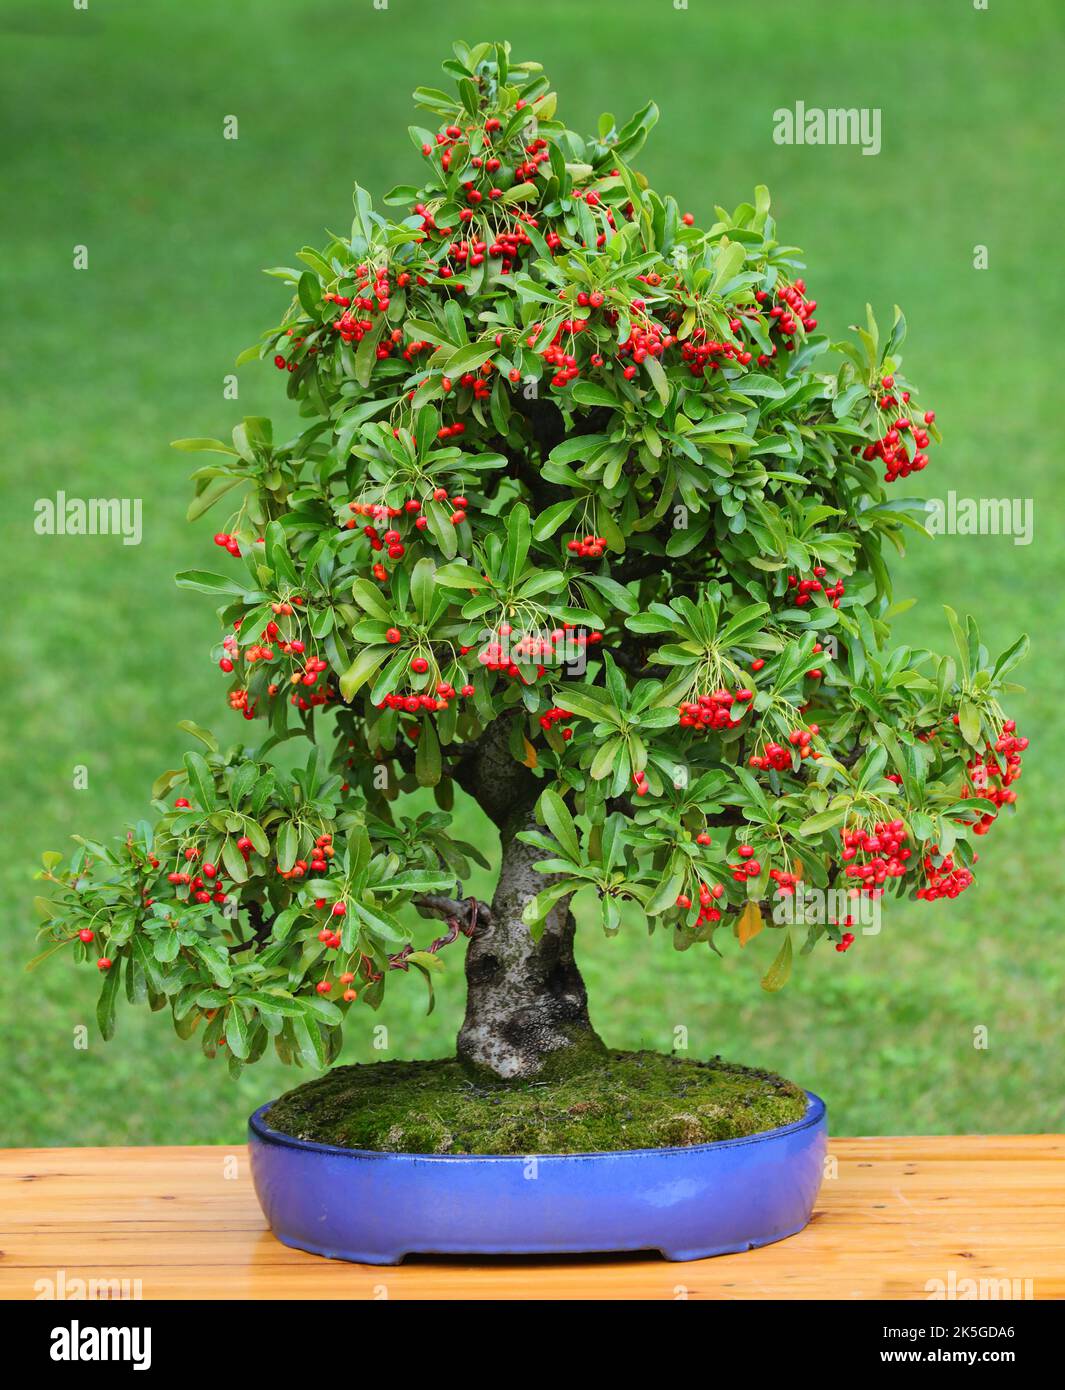 small bonsai tree with microscopic red berries inside the pot Stock Photo